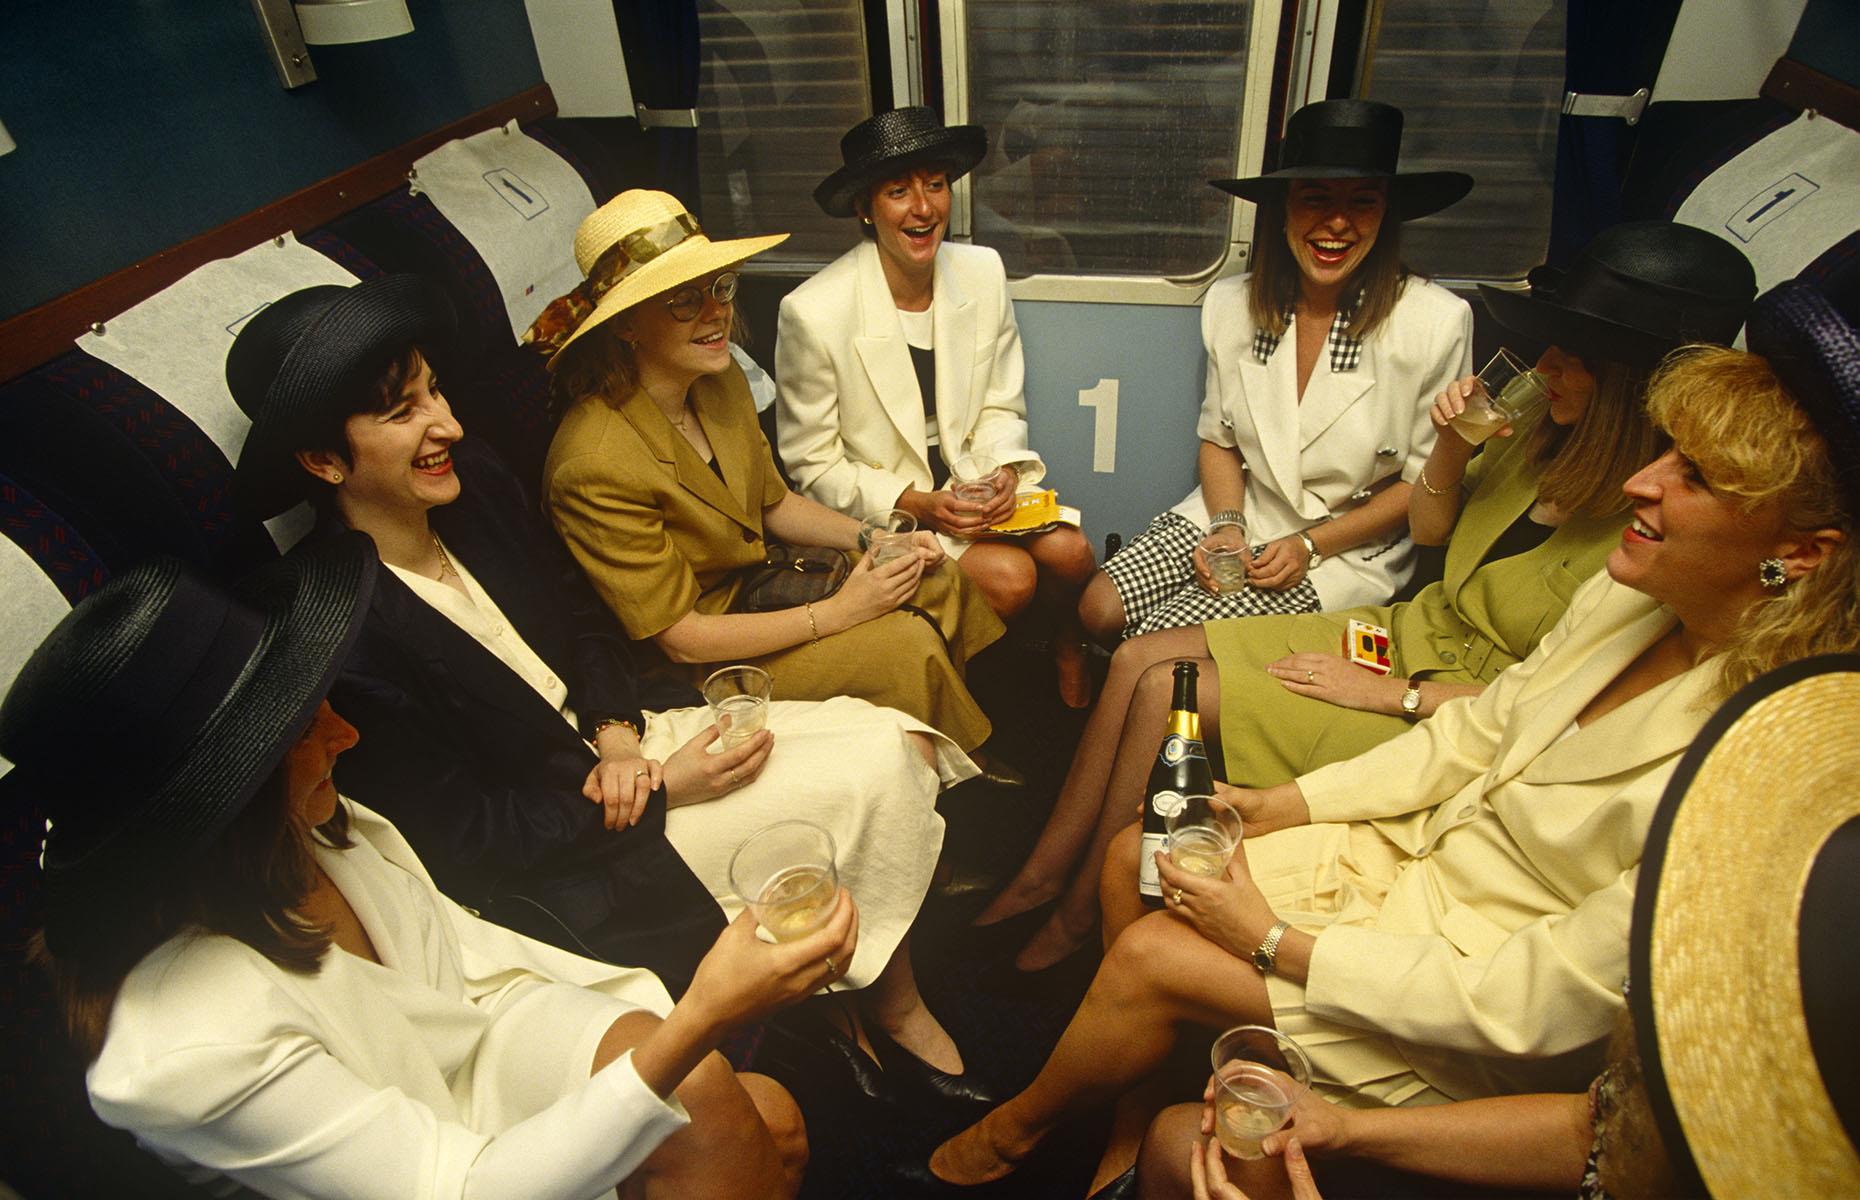 Throughout the ages trains have played a significant part in people's lives. While private car ownership has steadily risen since the 1980s, trains are still often a significant part of special occasions like this one. Here, captured in 1993, a group of women are traveling from London Waterloo to Royal Ascot in Berkshire for Ladies Day during the Royal Ascot racing week.